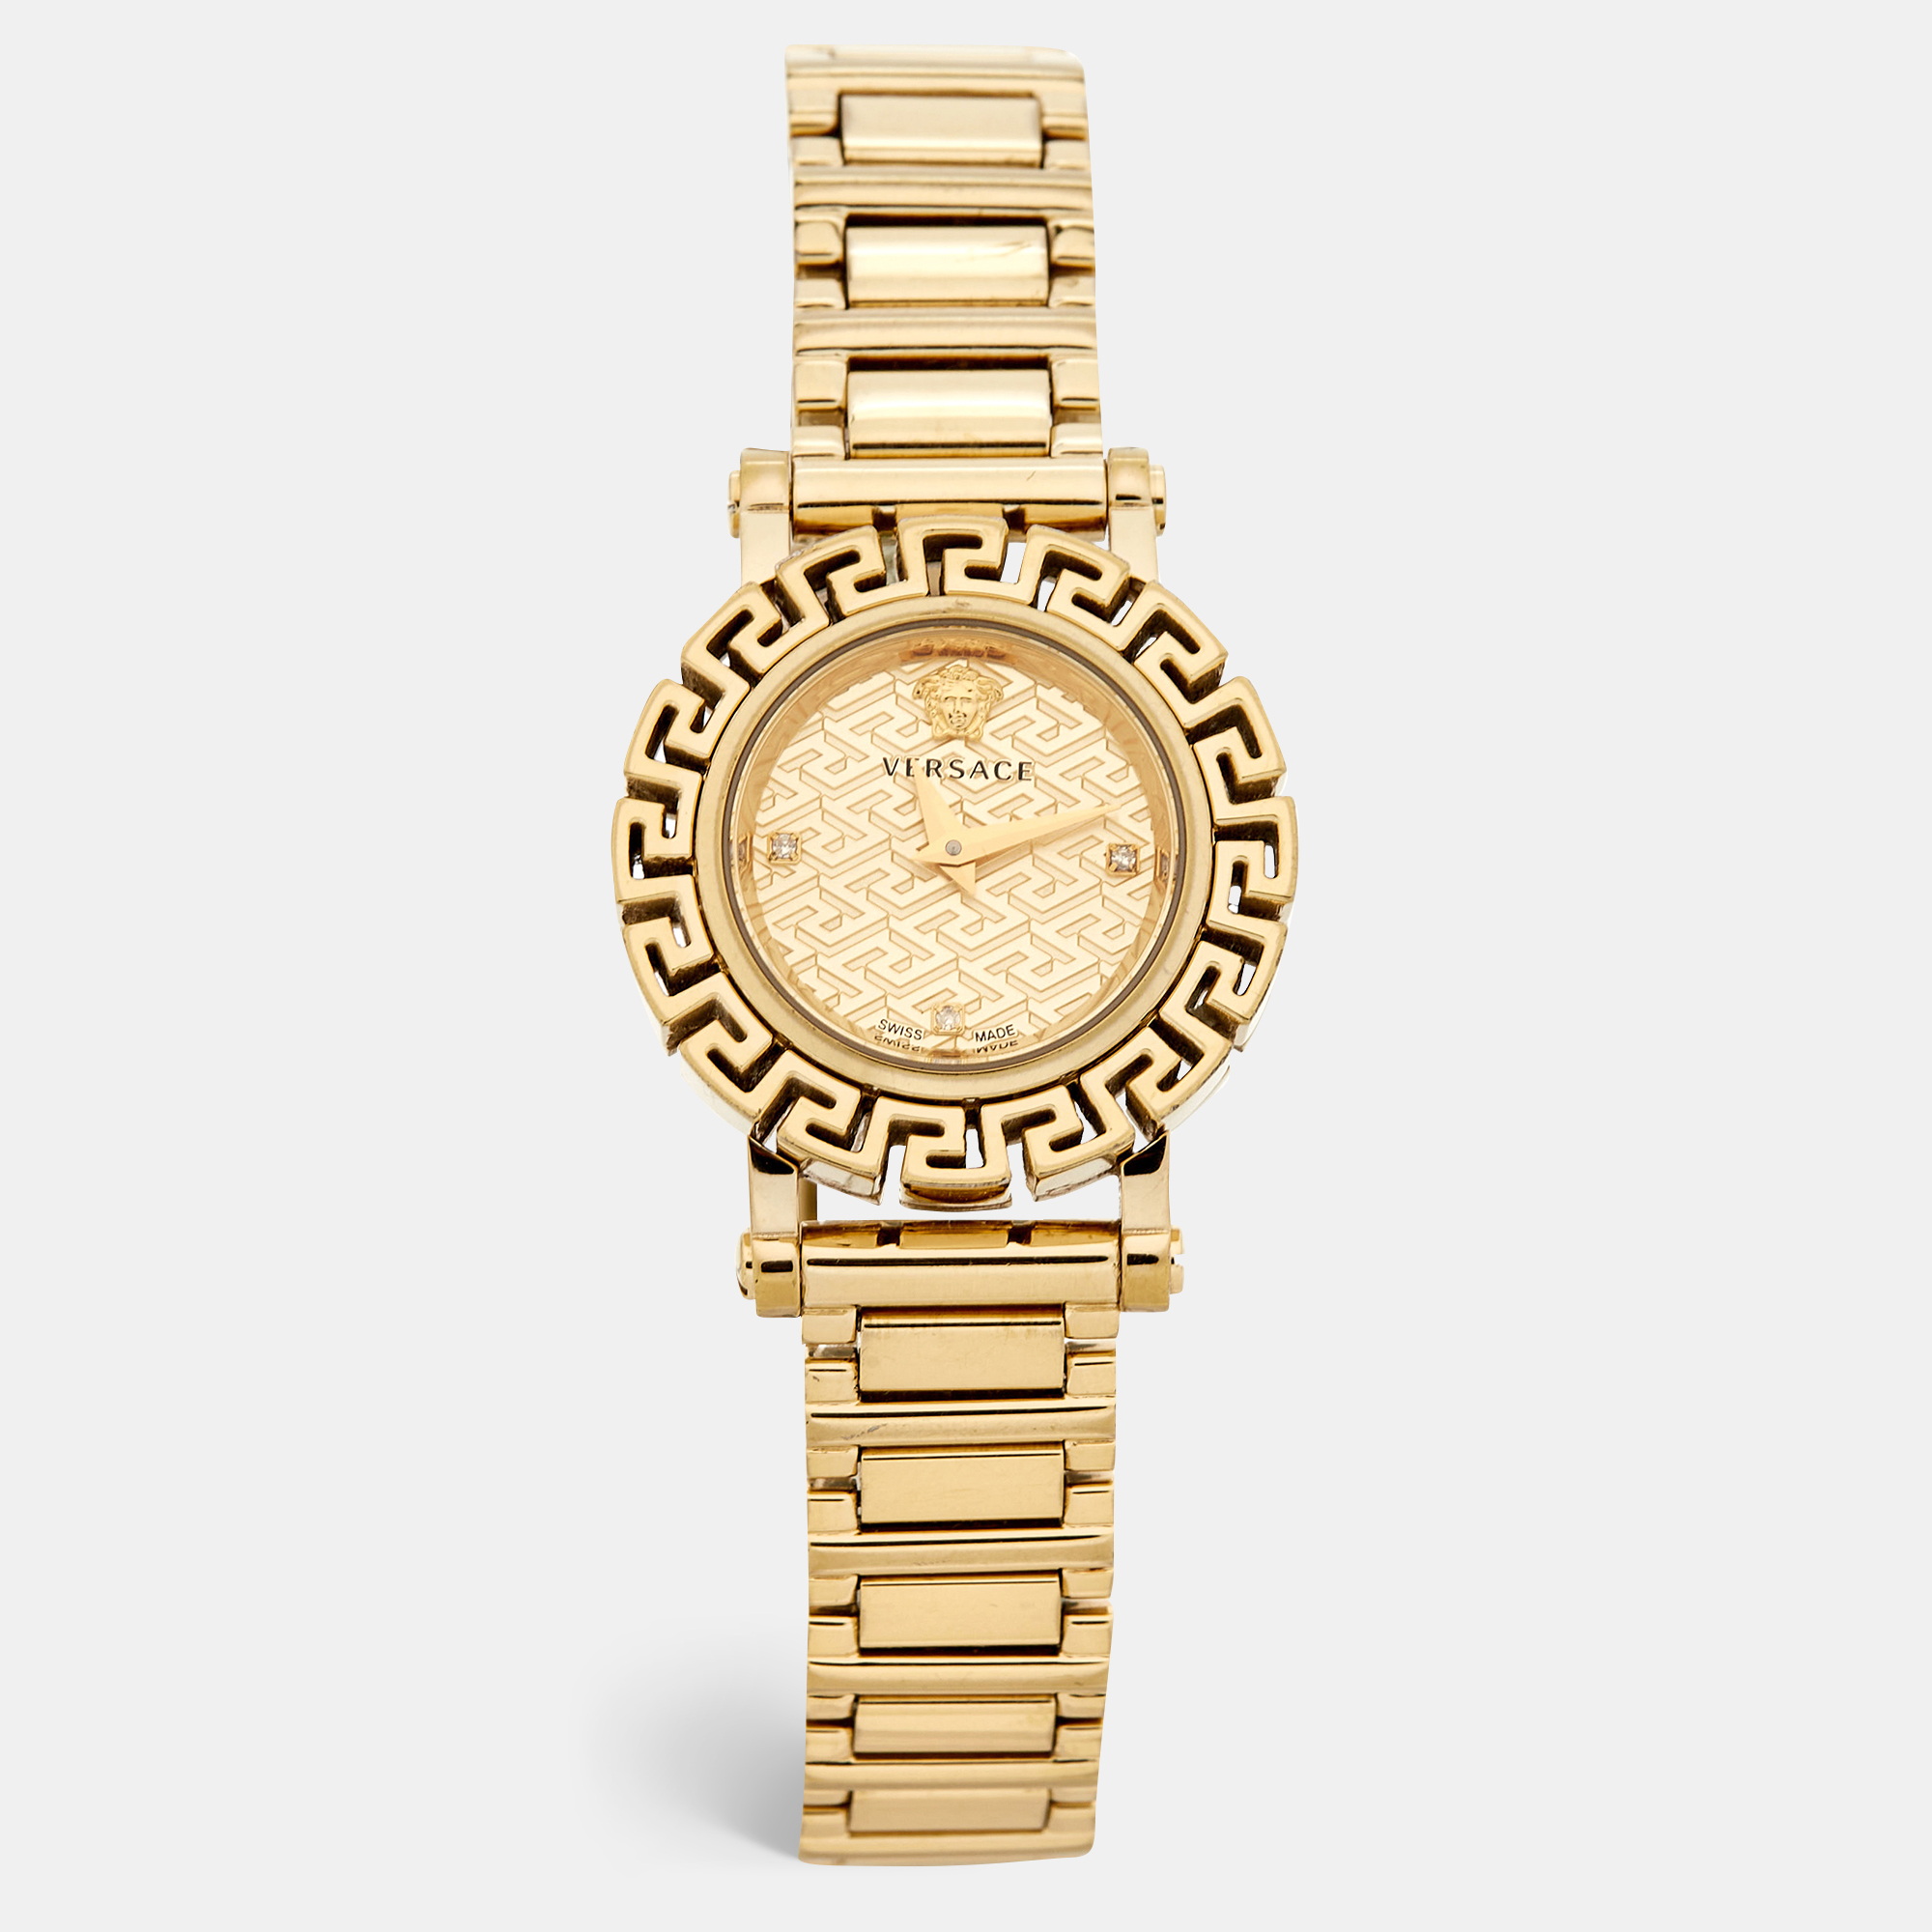 Versace champagne gold plated stainless steel greca glam ve2q00422 women's wristwatch 29 mm